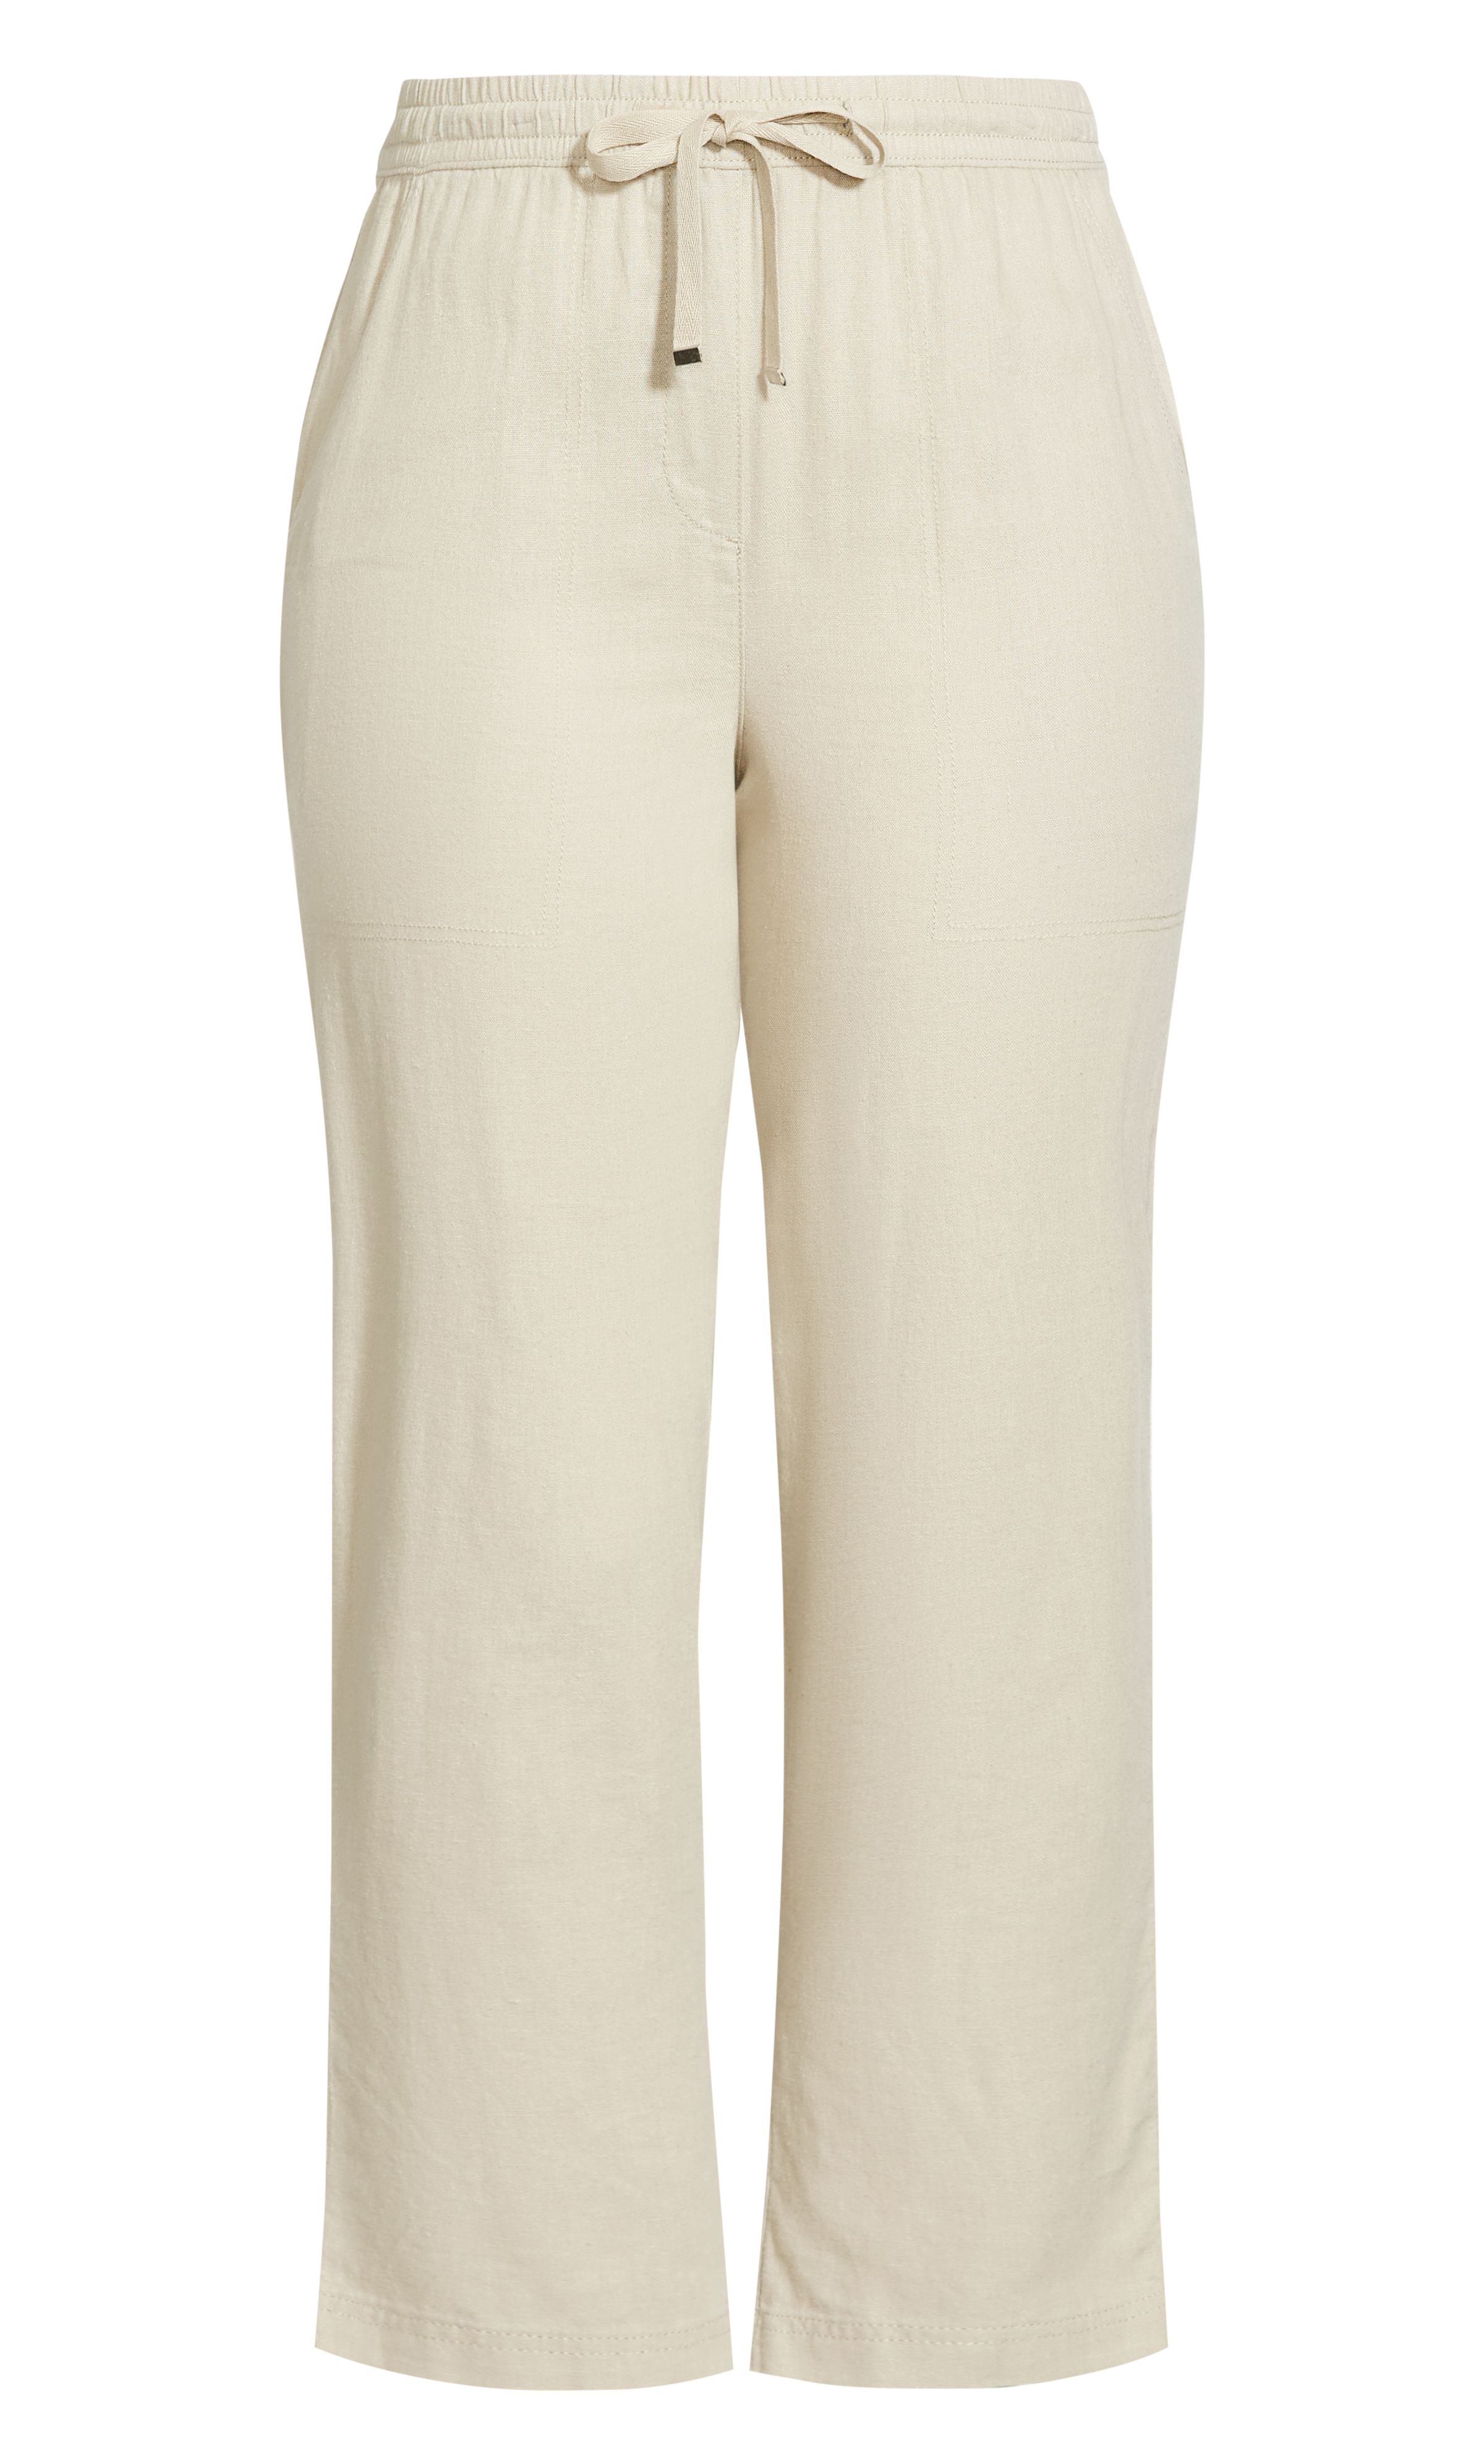 Look the part this summer in our staple Linen Blend Jogger, offering a versatile stone colourway. Combining a quality linen blend fabrication with elasticated waistband and breezy, relaxed leg, this pair seamlessly marries everyday comfort with fashion-forward style. Key Features Include: - Elasticated waist with drawstring - Linen blend fabrication - Relaxed leg - Unlined - Pull up style - Full length Tuck in a satin cami, finishing with strappy sandals and a cross body bag.